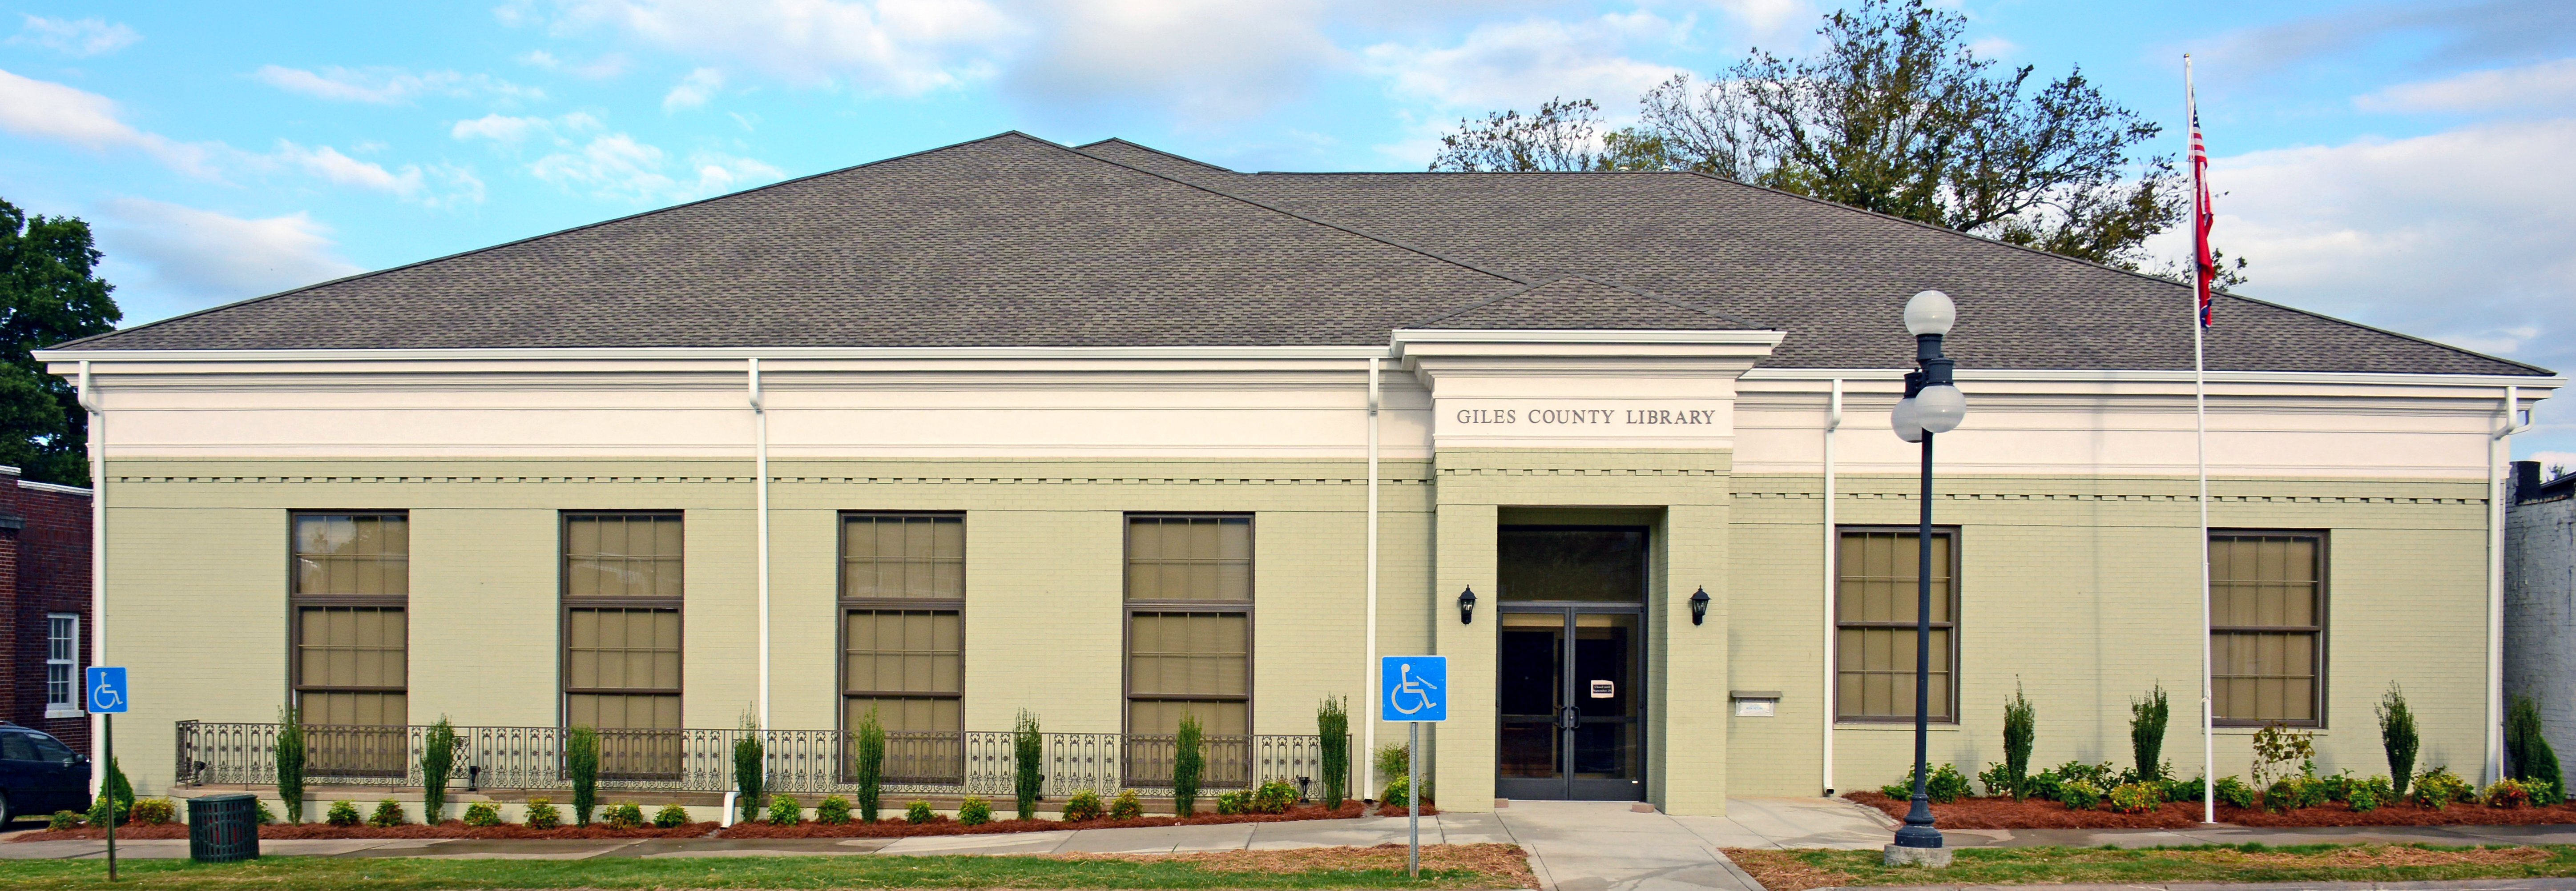 Giles County Public Library | Pulaski, Tennessee | Brindley Construction